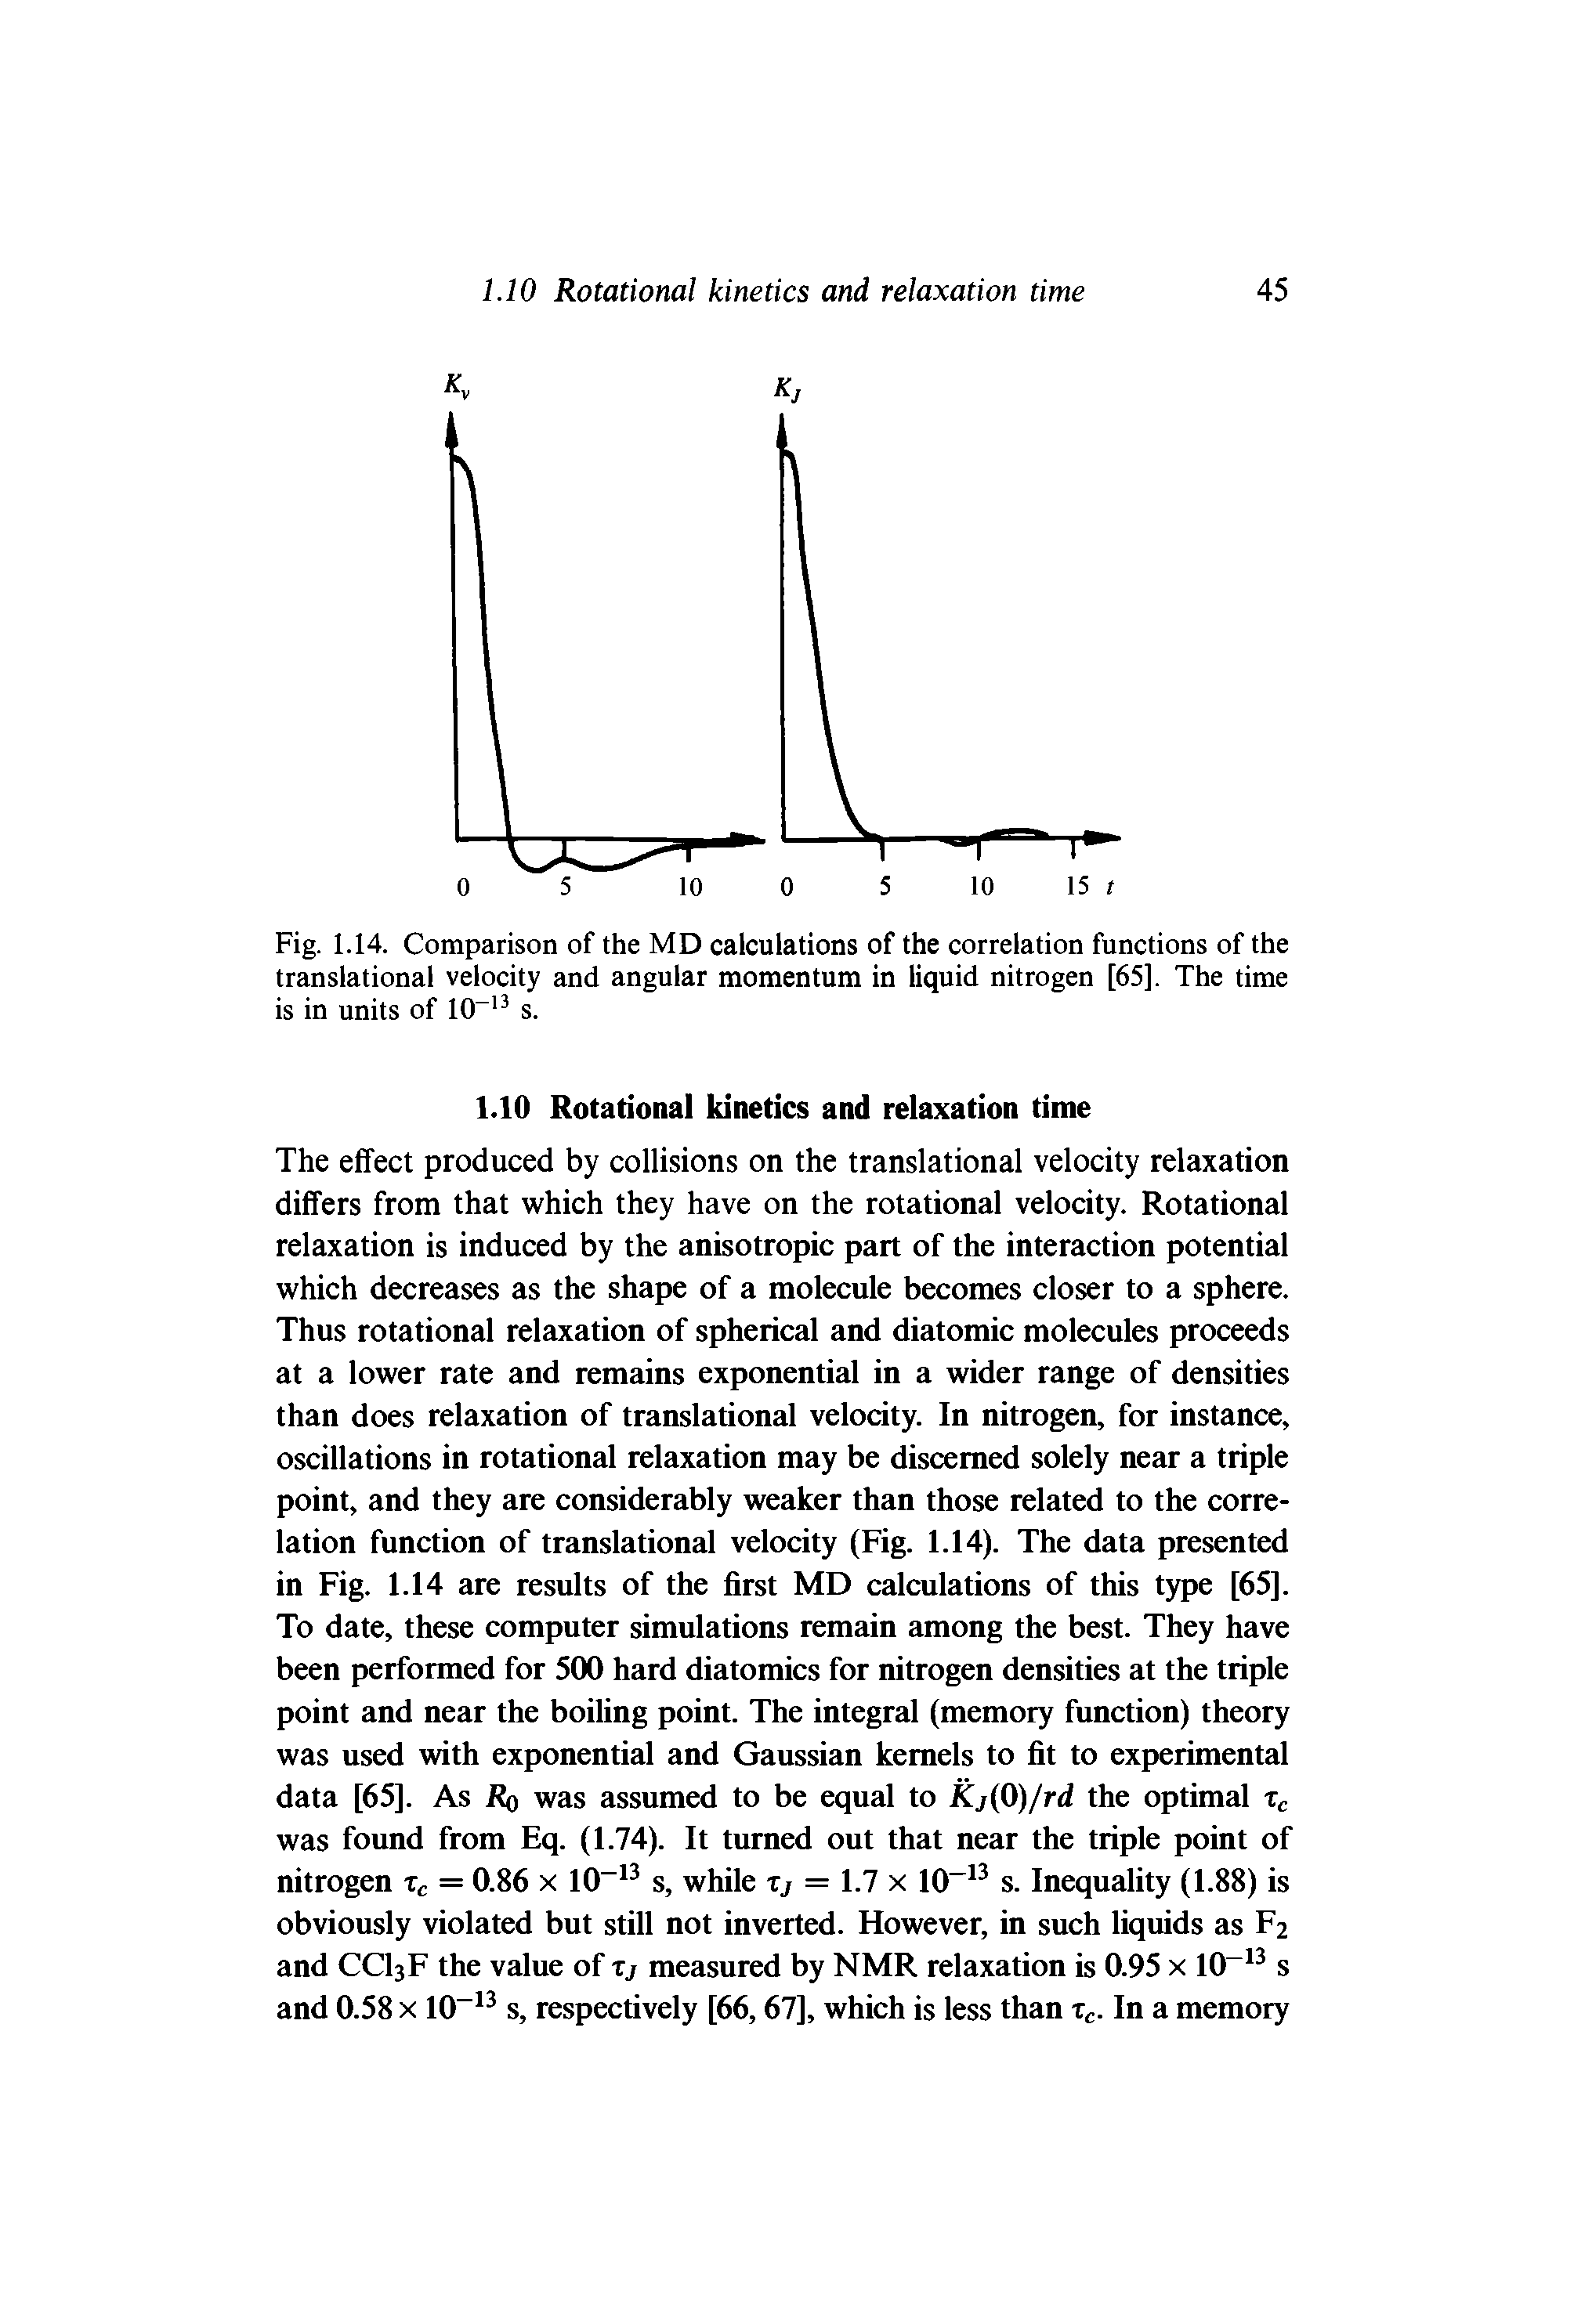 Fig. 1.14. Comparison of the MD calculations of the correlation functions of the translational velocity and angular momentum in liquid nitrogen [65]. The time is in units of 10-13 s.